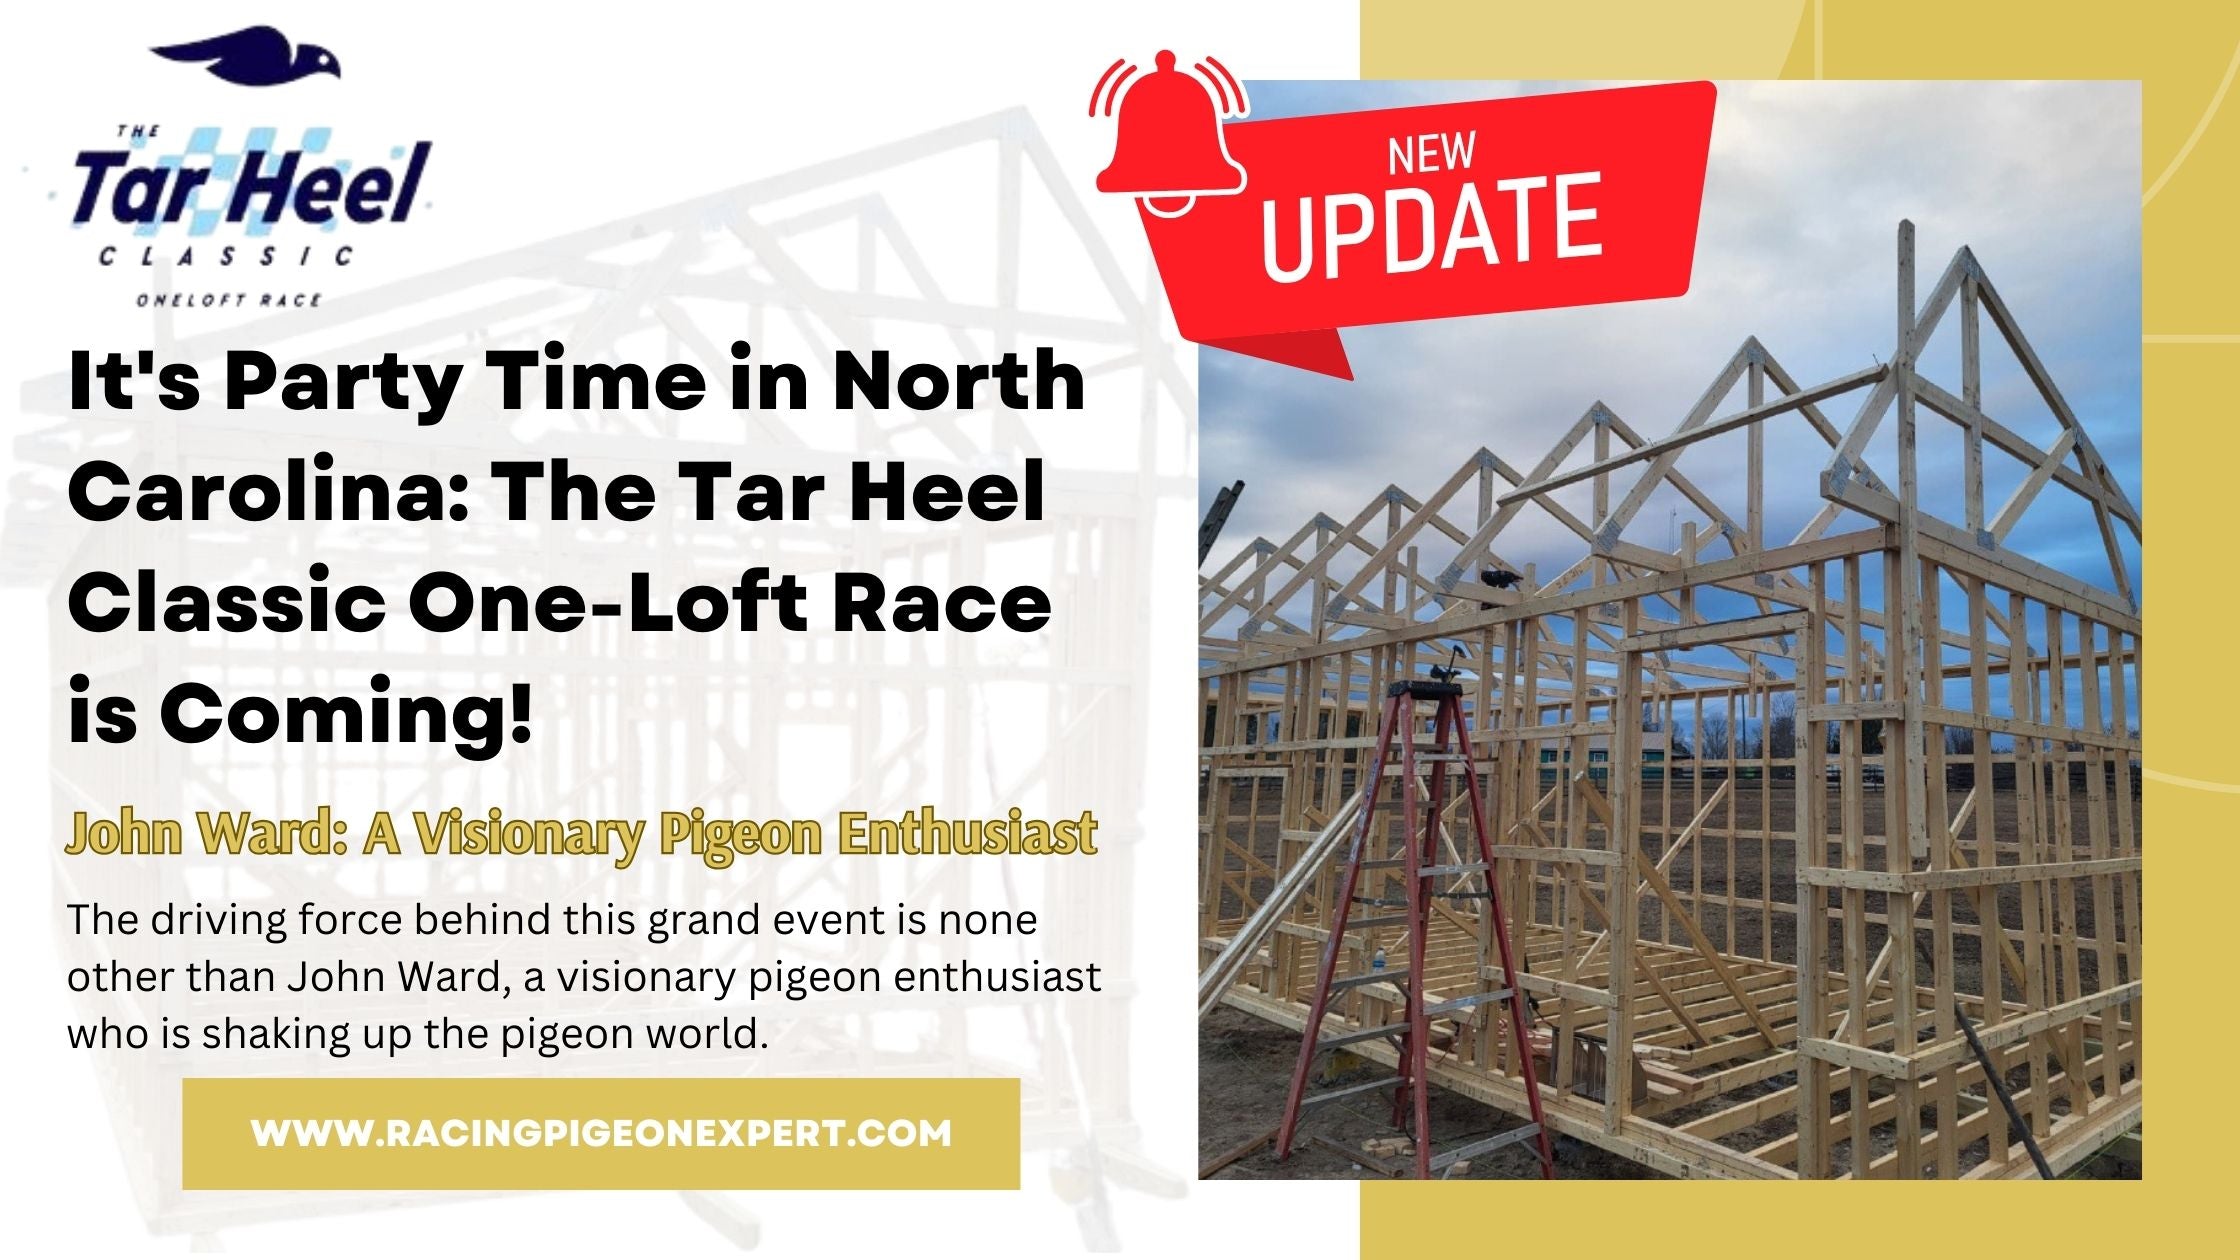 It's Party Time in North Carolina: The Tar Heel Classic One- Loft Race is Coming!